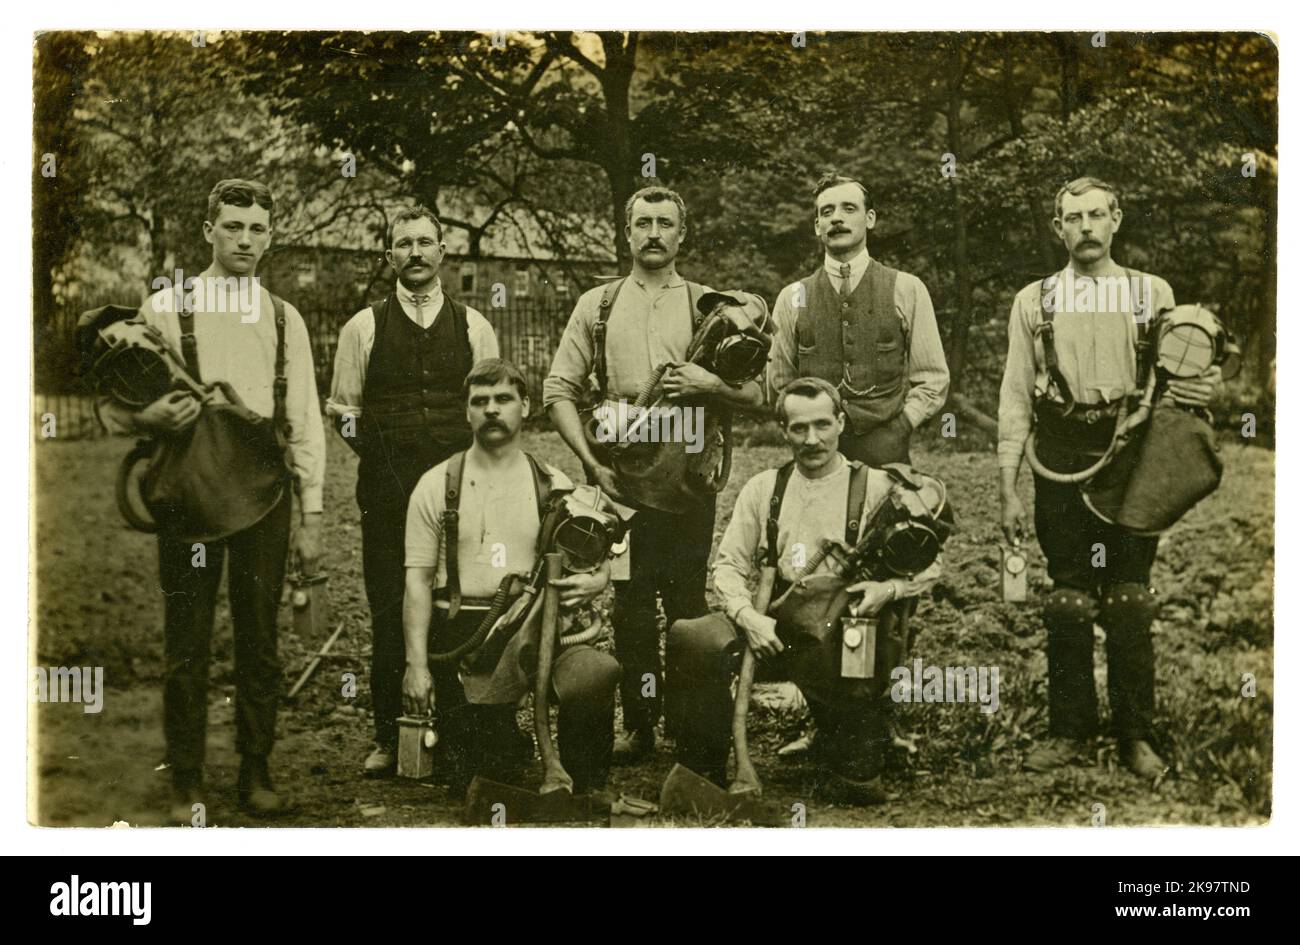 Original early 1900's postcard of coal mining pit rescue team with axes and holding breathing apparatus in form of Draeger /Drager smoke helmets with attached breathing bag covered by a leather flap, together with lamps, protective knee pads and a saw (in foreground) they were well equipped to respond if disaster occurred. Circa 1919, U.K. Stock Photo